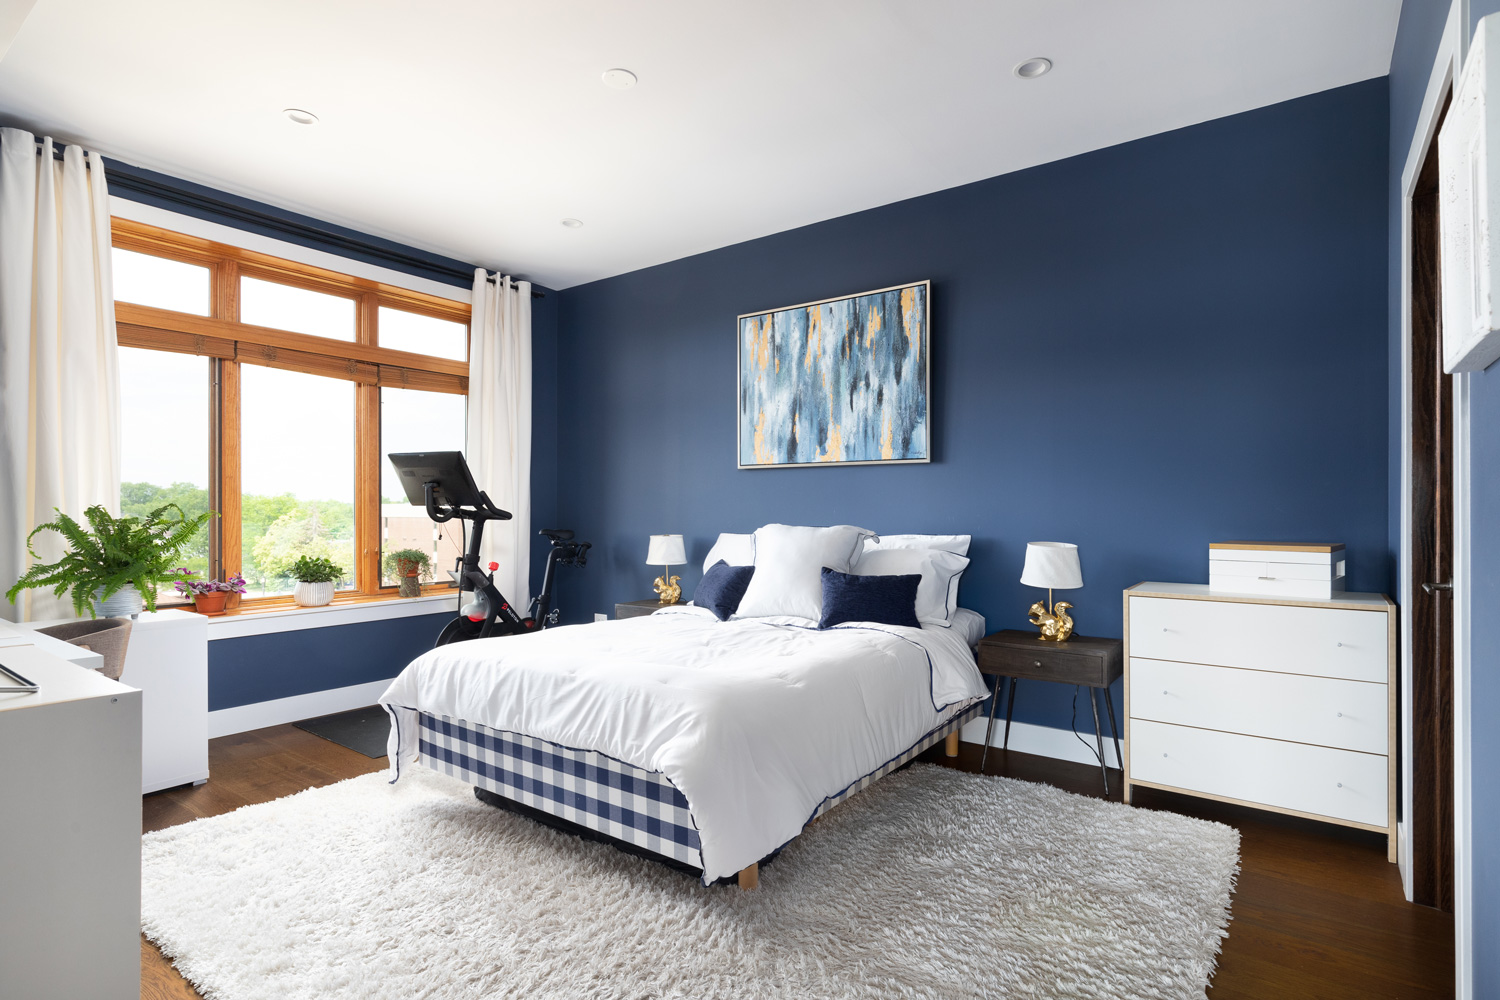 A navy blue bedroom with wood framed windows a bed sitting on a rug and hardwood floors, and a Peloton.